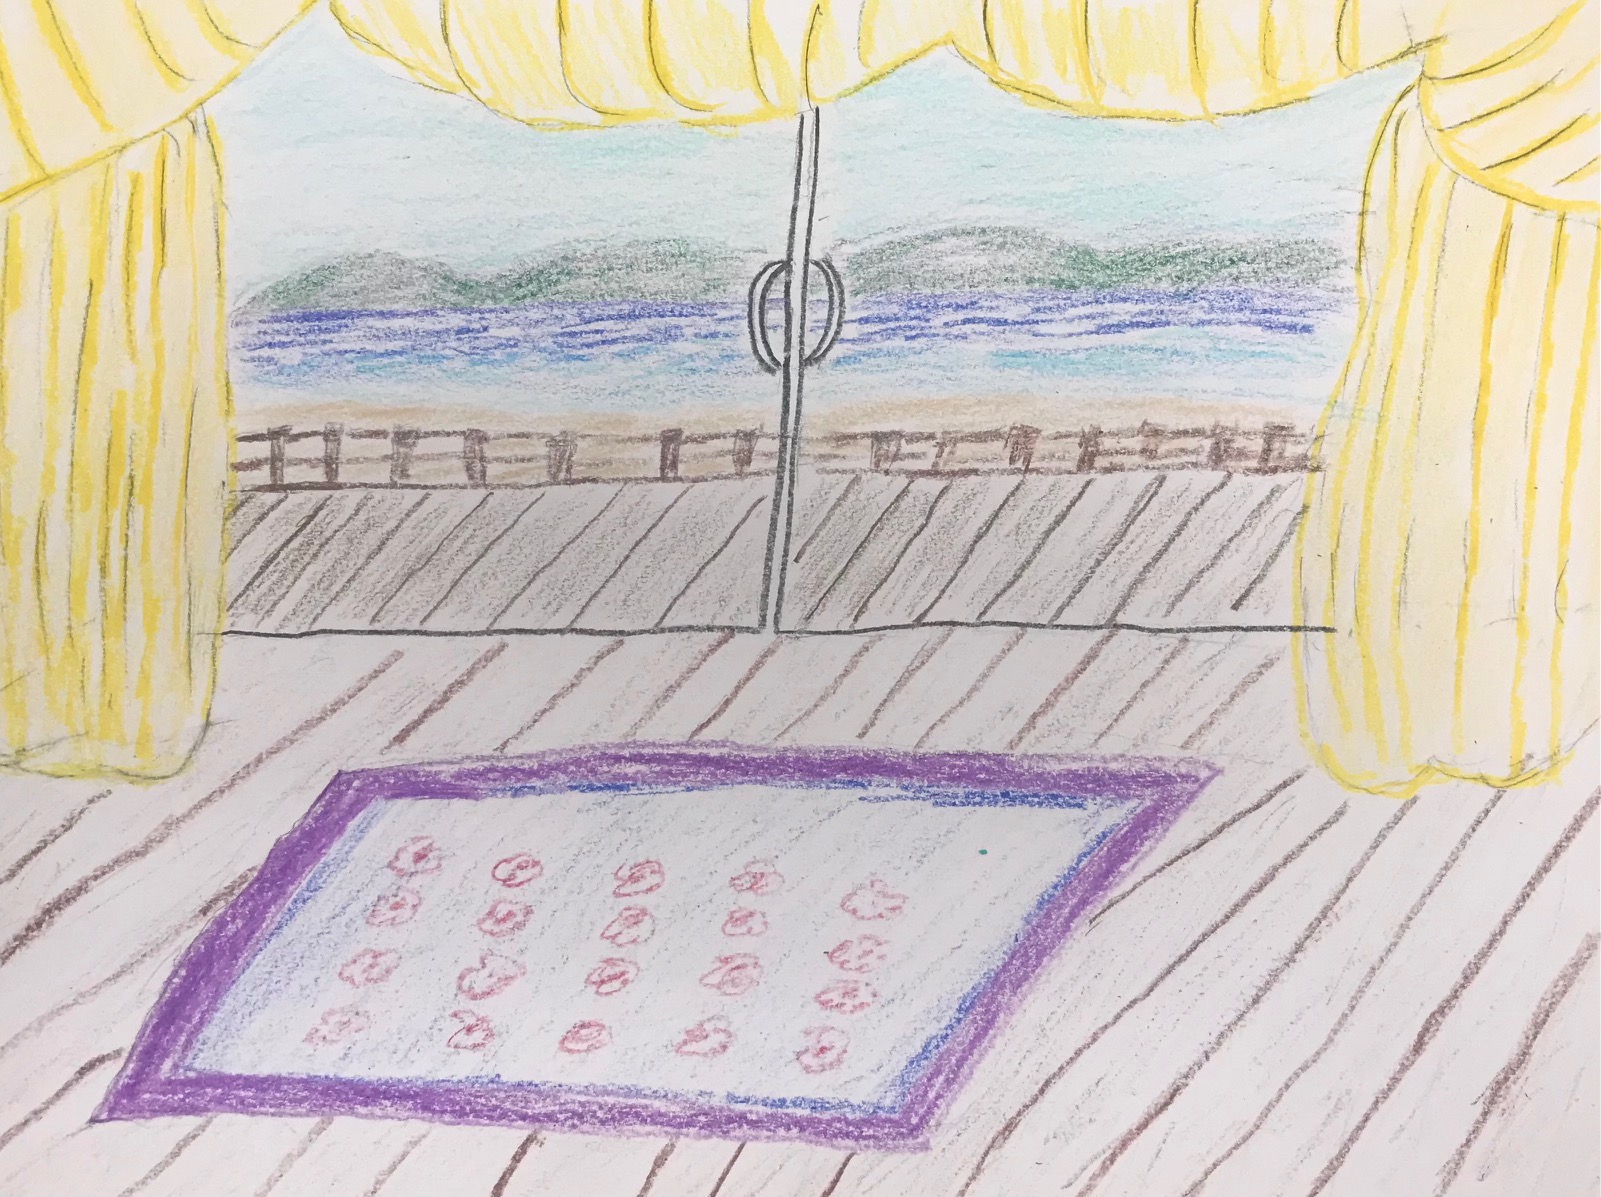 Crayon drawing of yellow curtains, glass window looking onto water, hills. Wooden floor and mat with flowers in foreground.